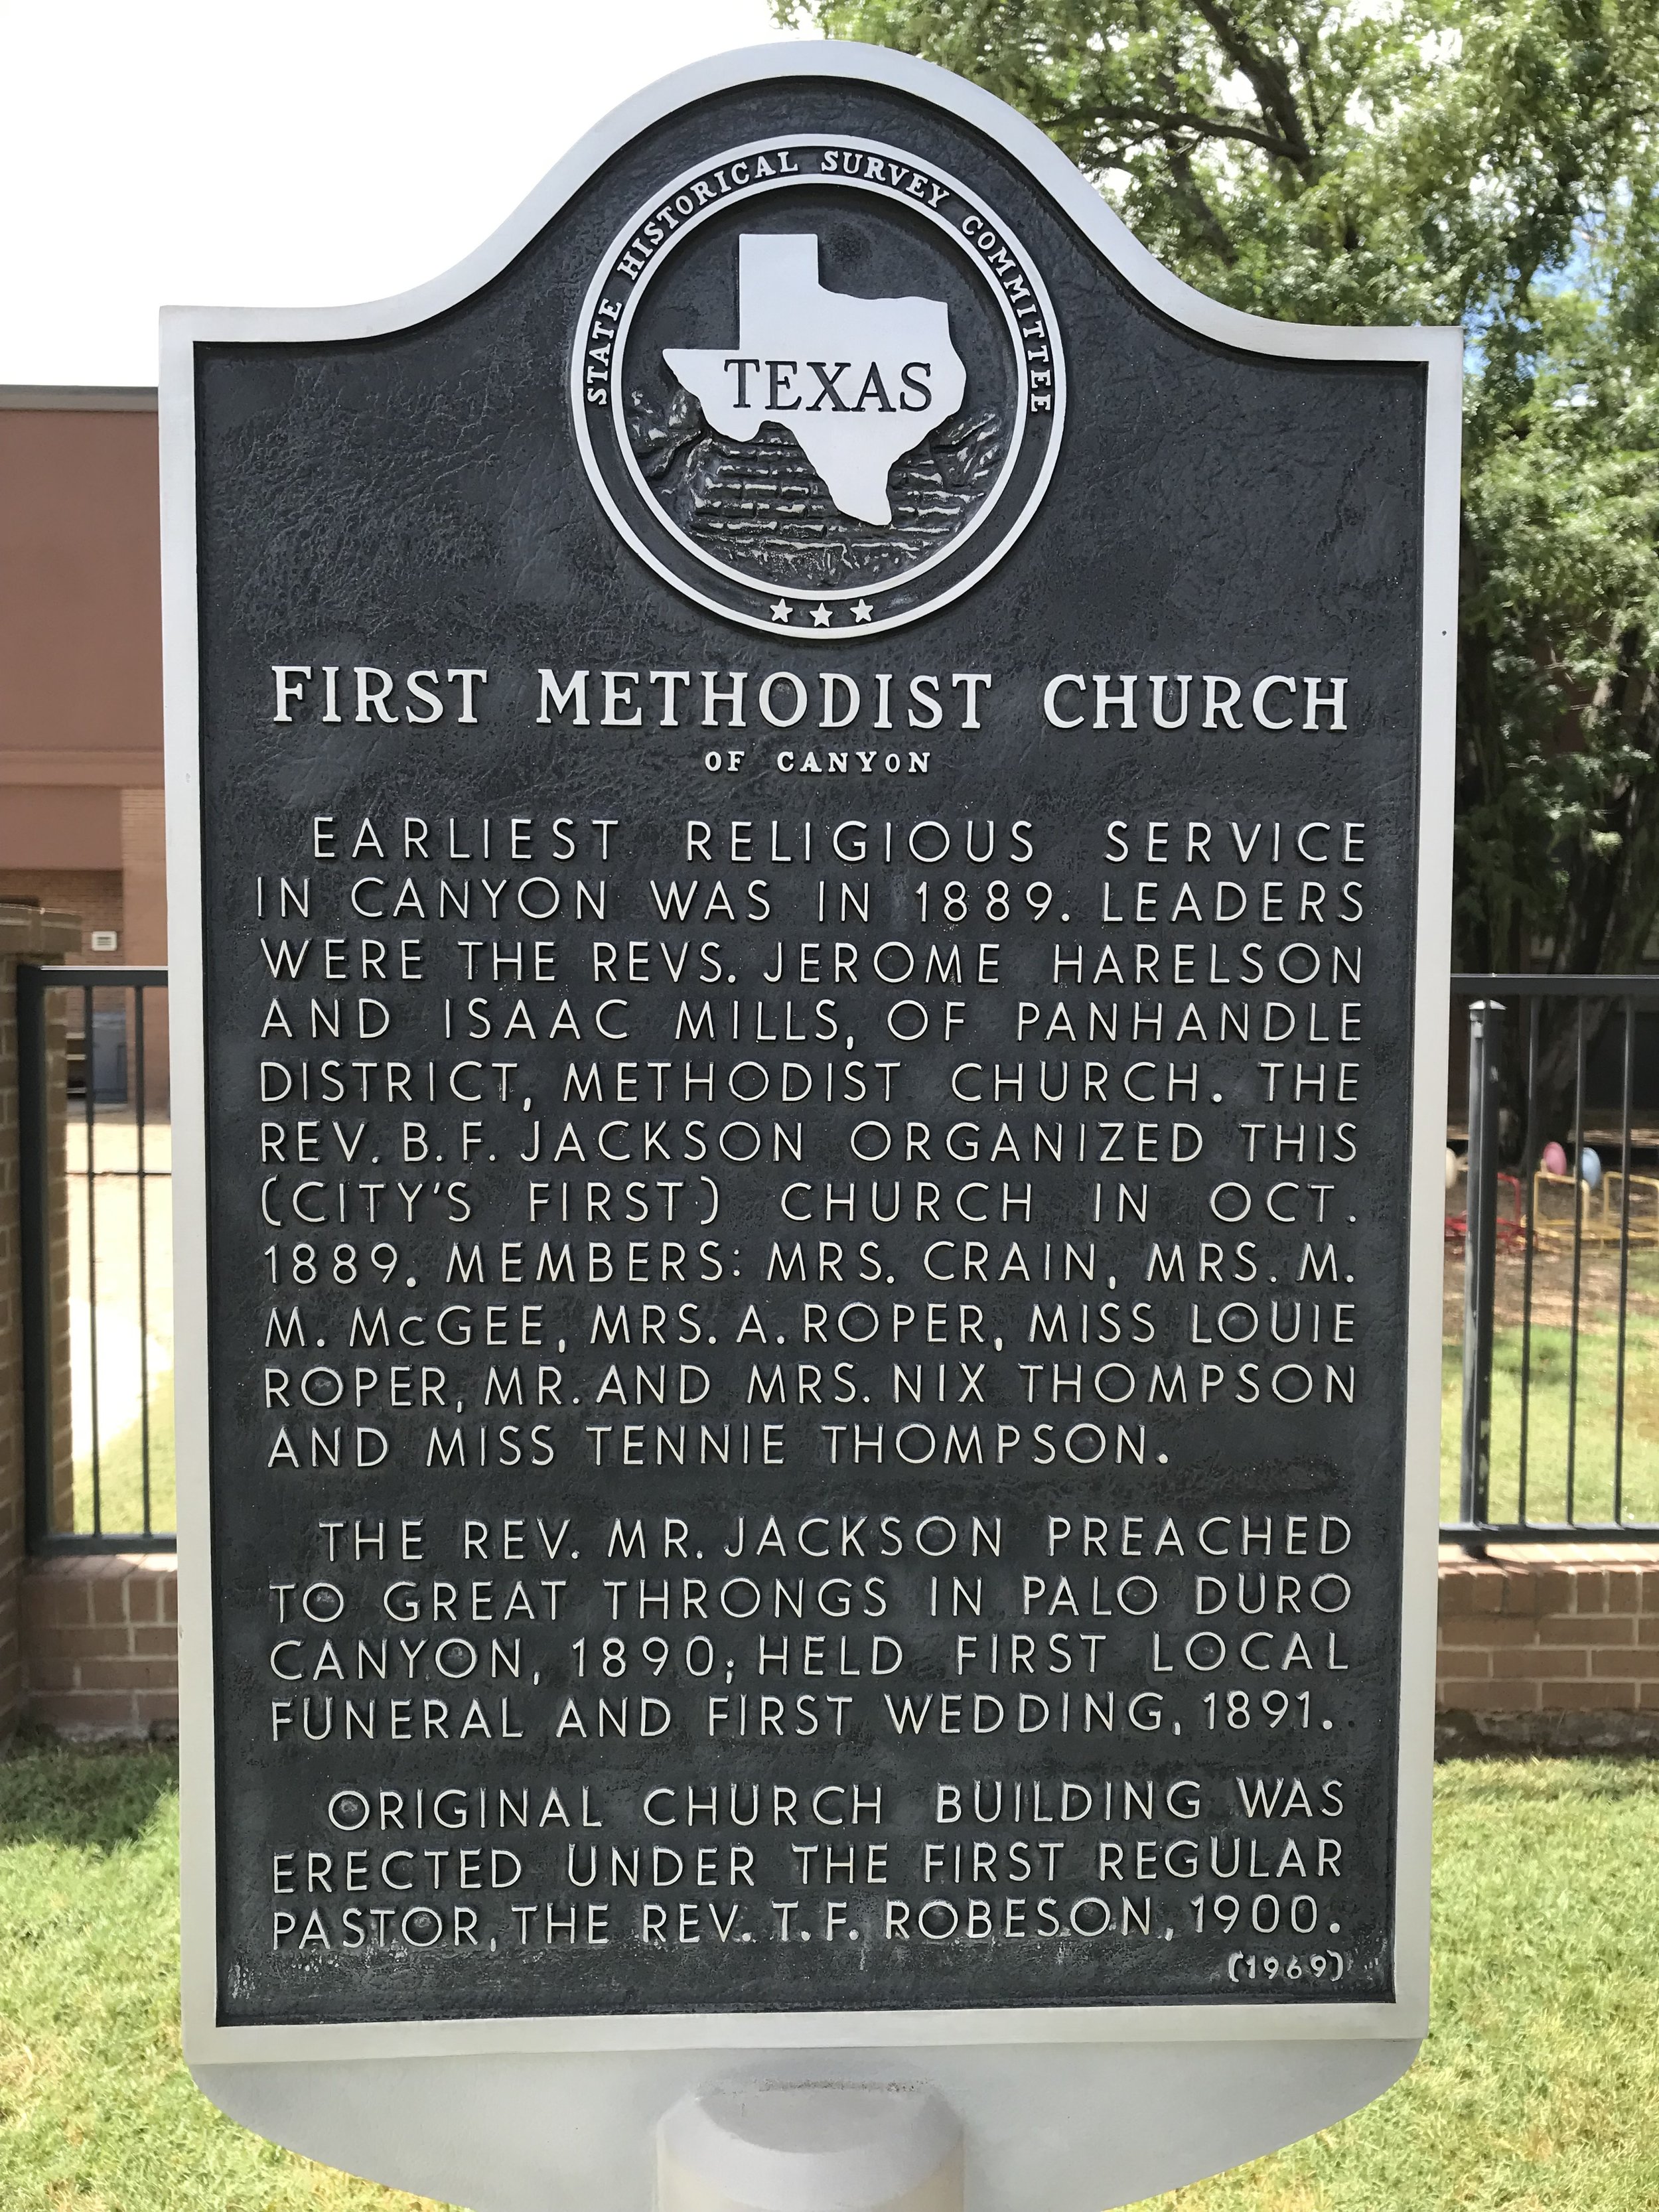 1750: First Methodist Church of Canyon